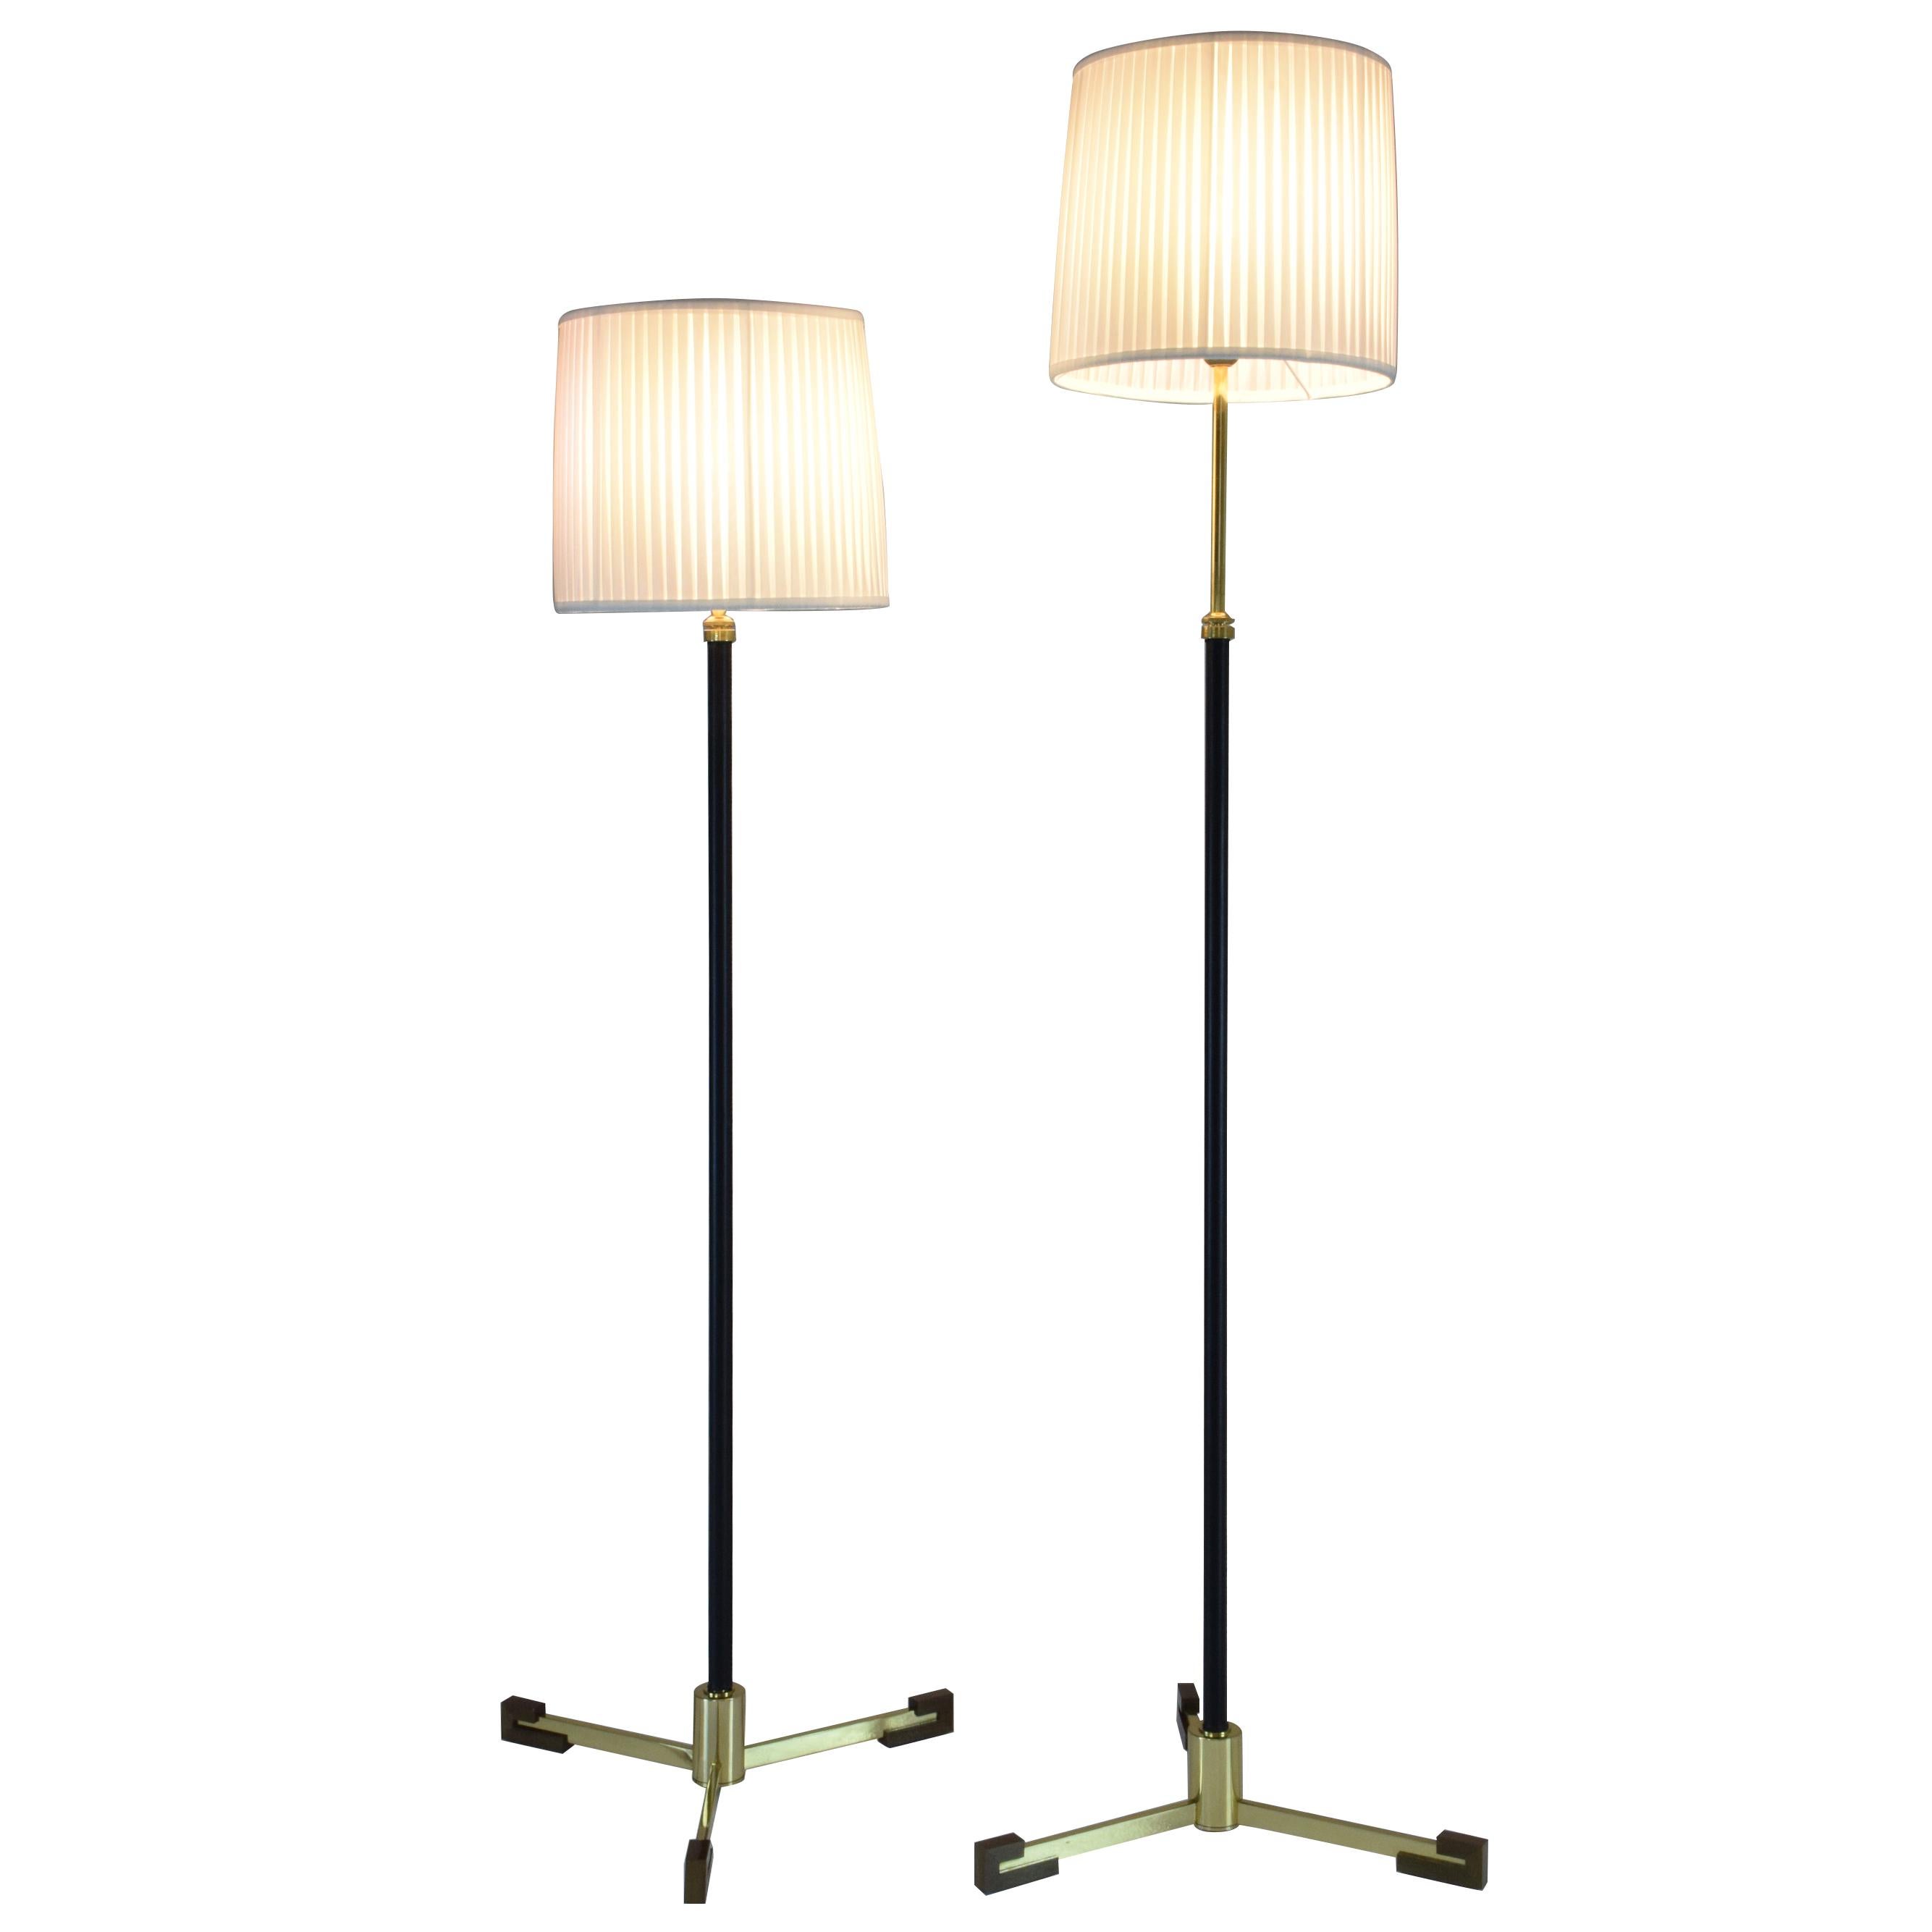 Lao-F1 Contemporary Adjustable Leather Brass Floor Lamp